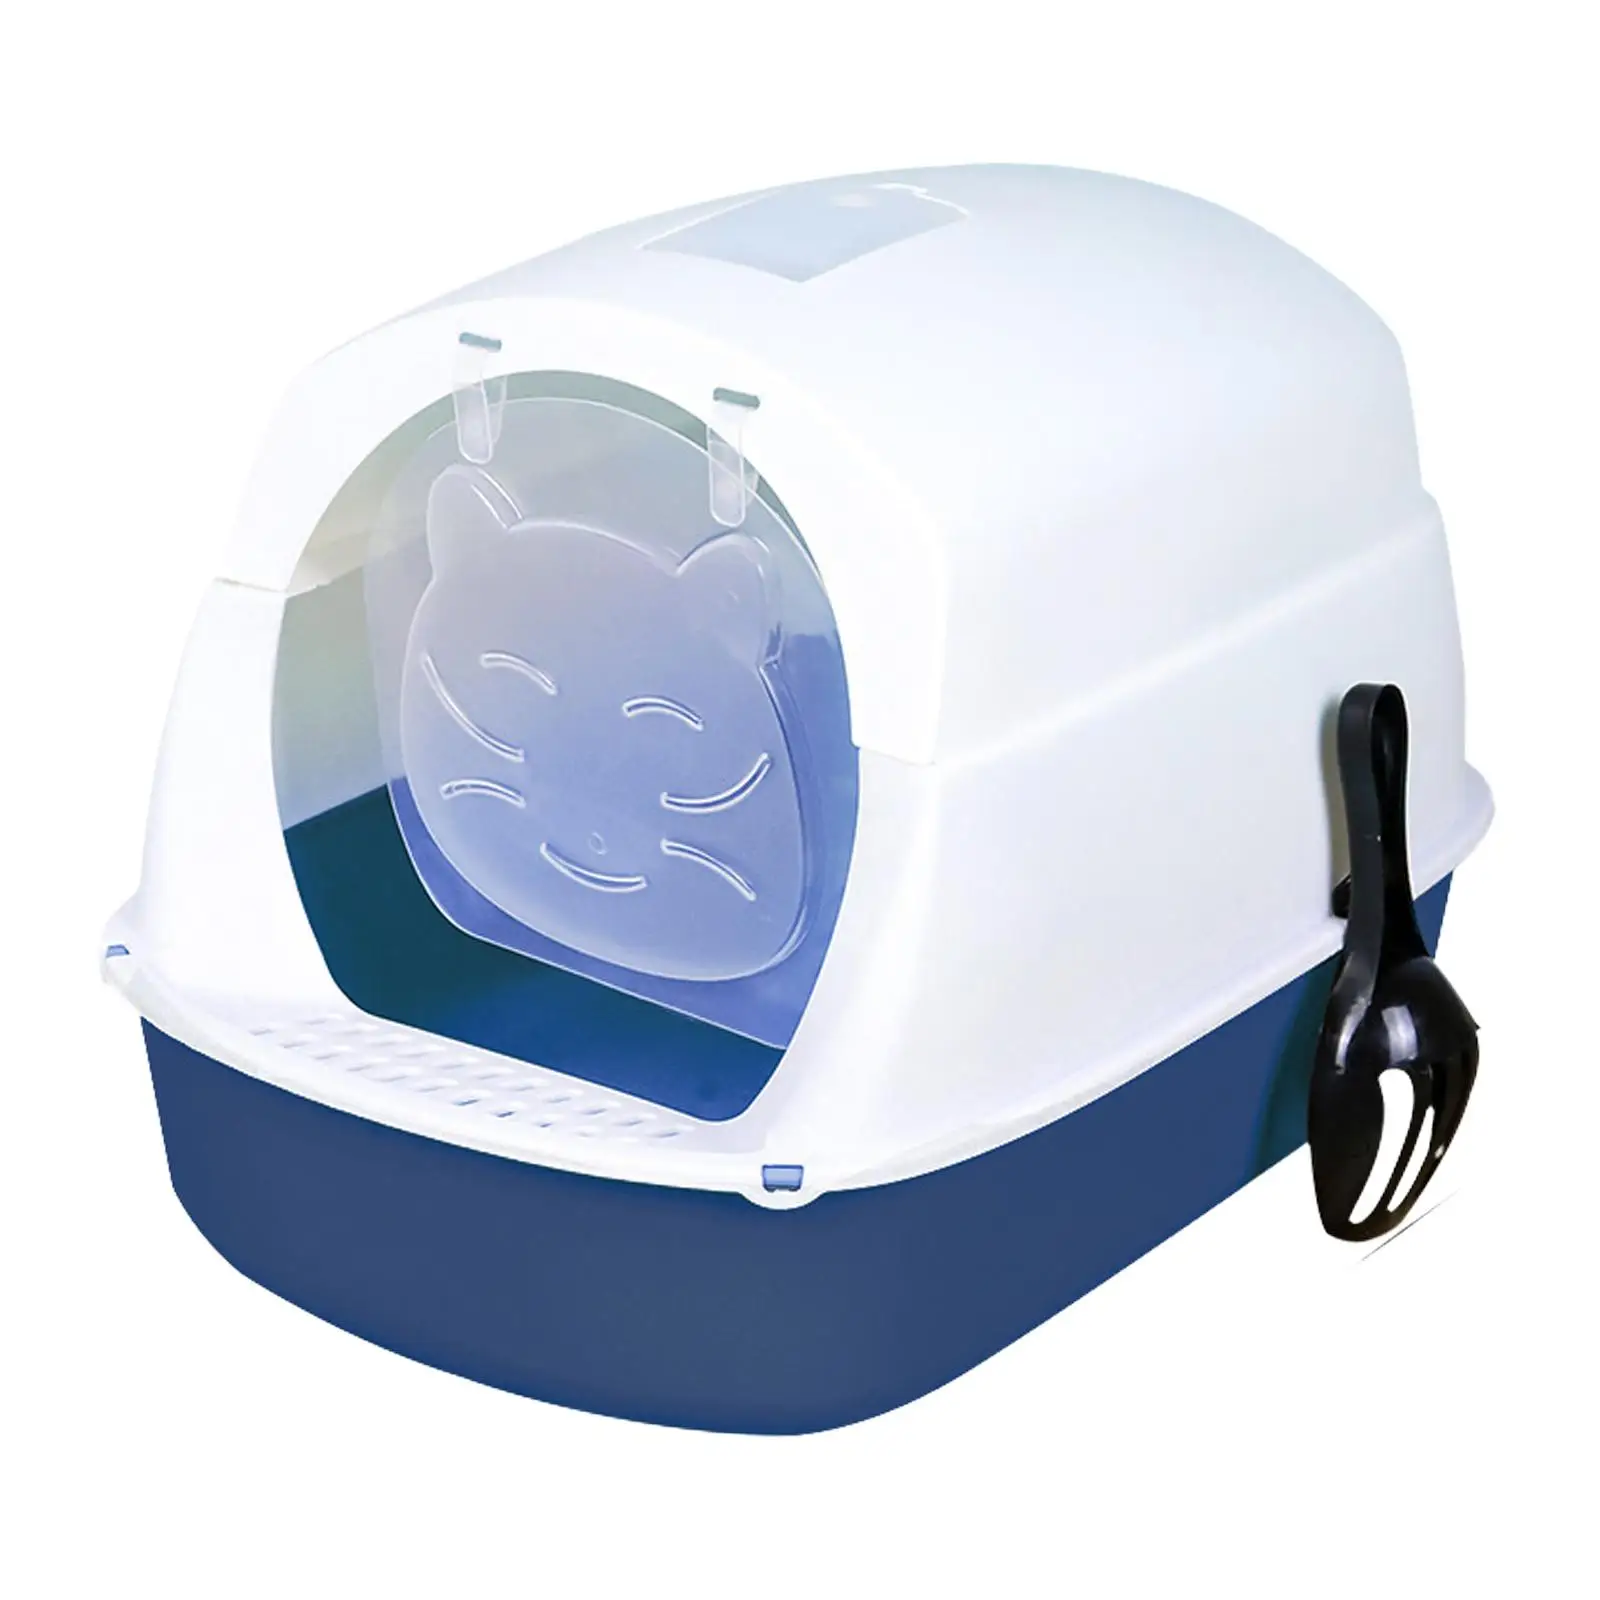 Hooded Cat Litter Box with Lid Kitten Potty Enclosed and Covered Cat Toilet